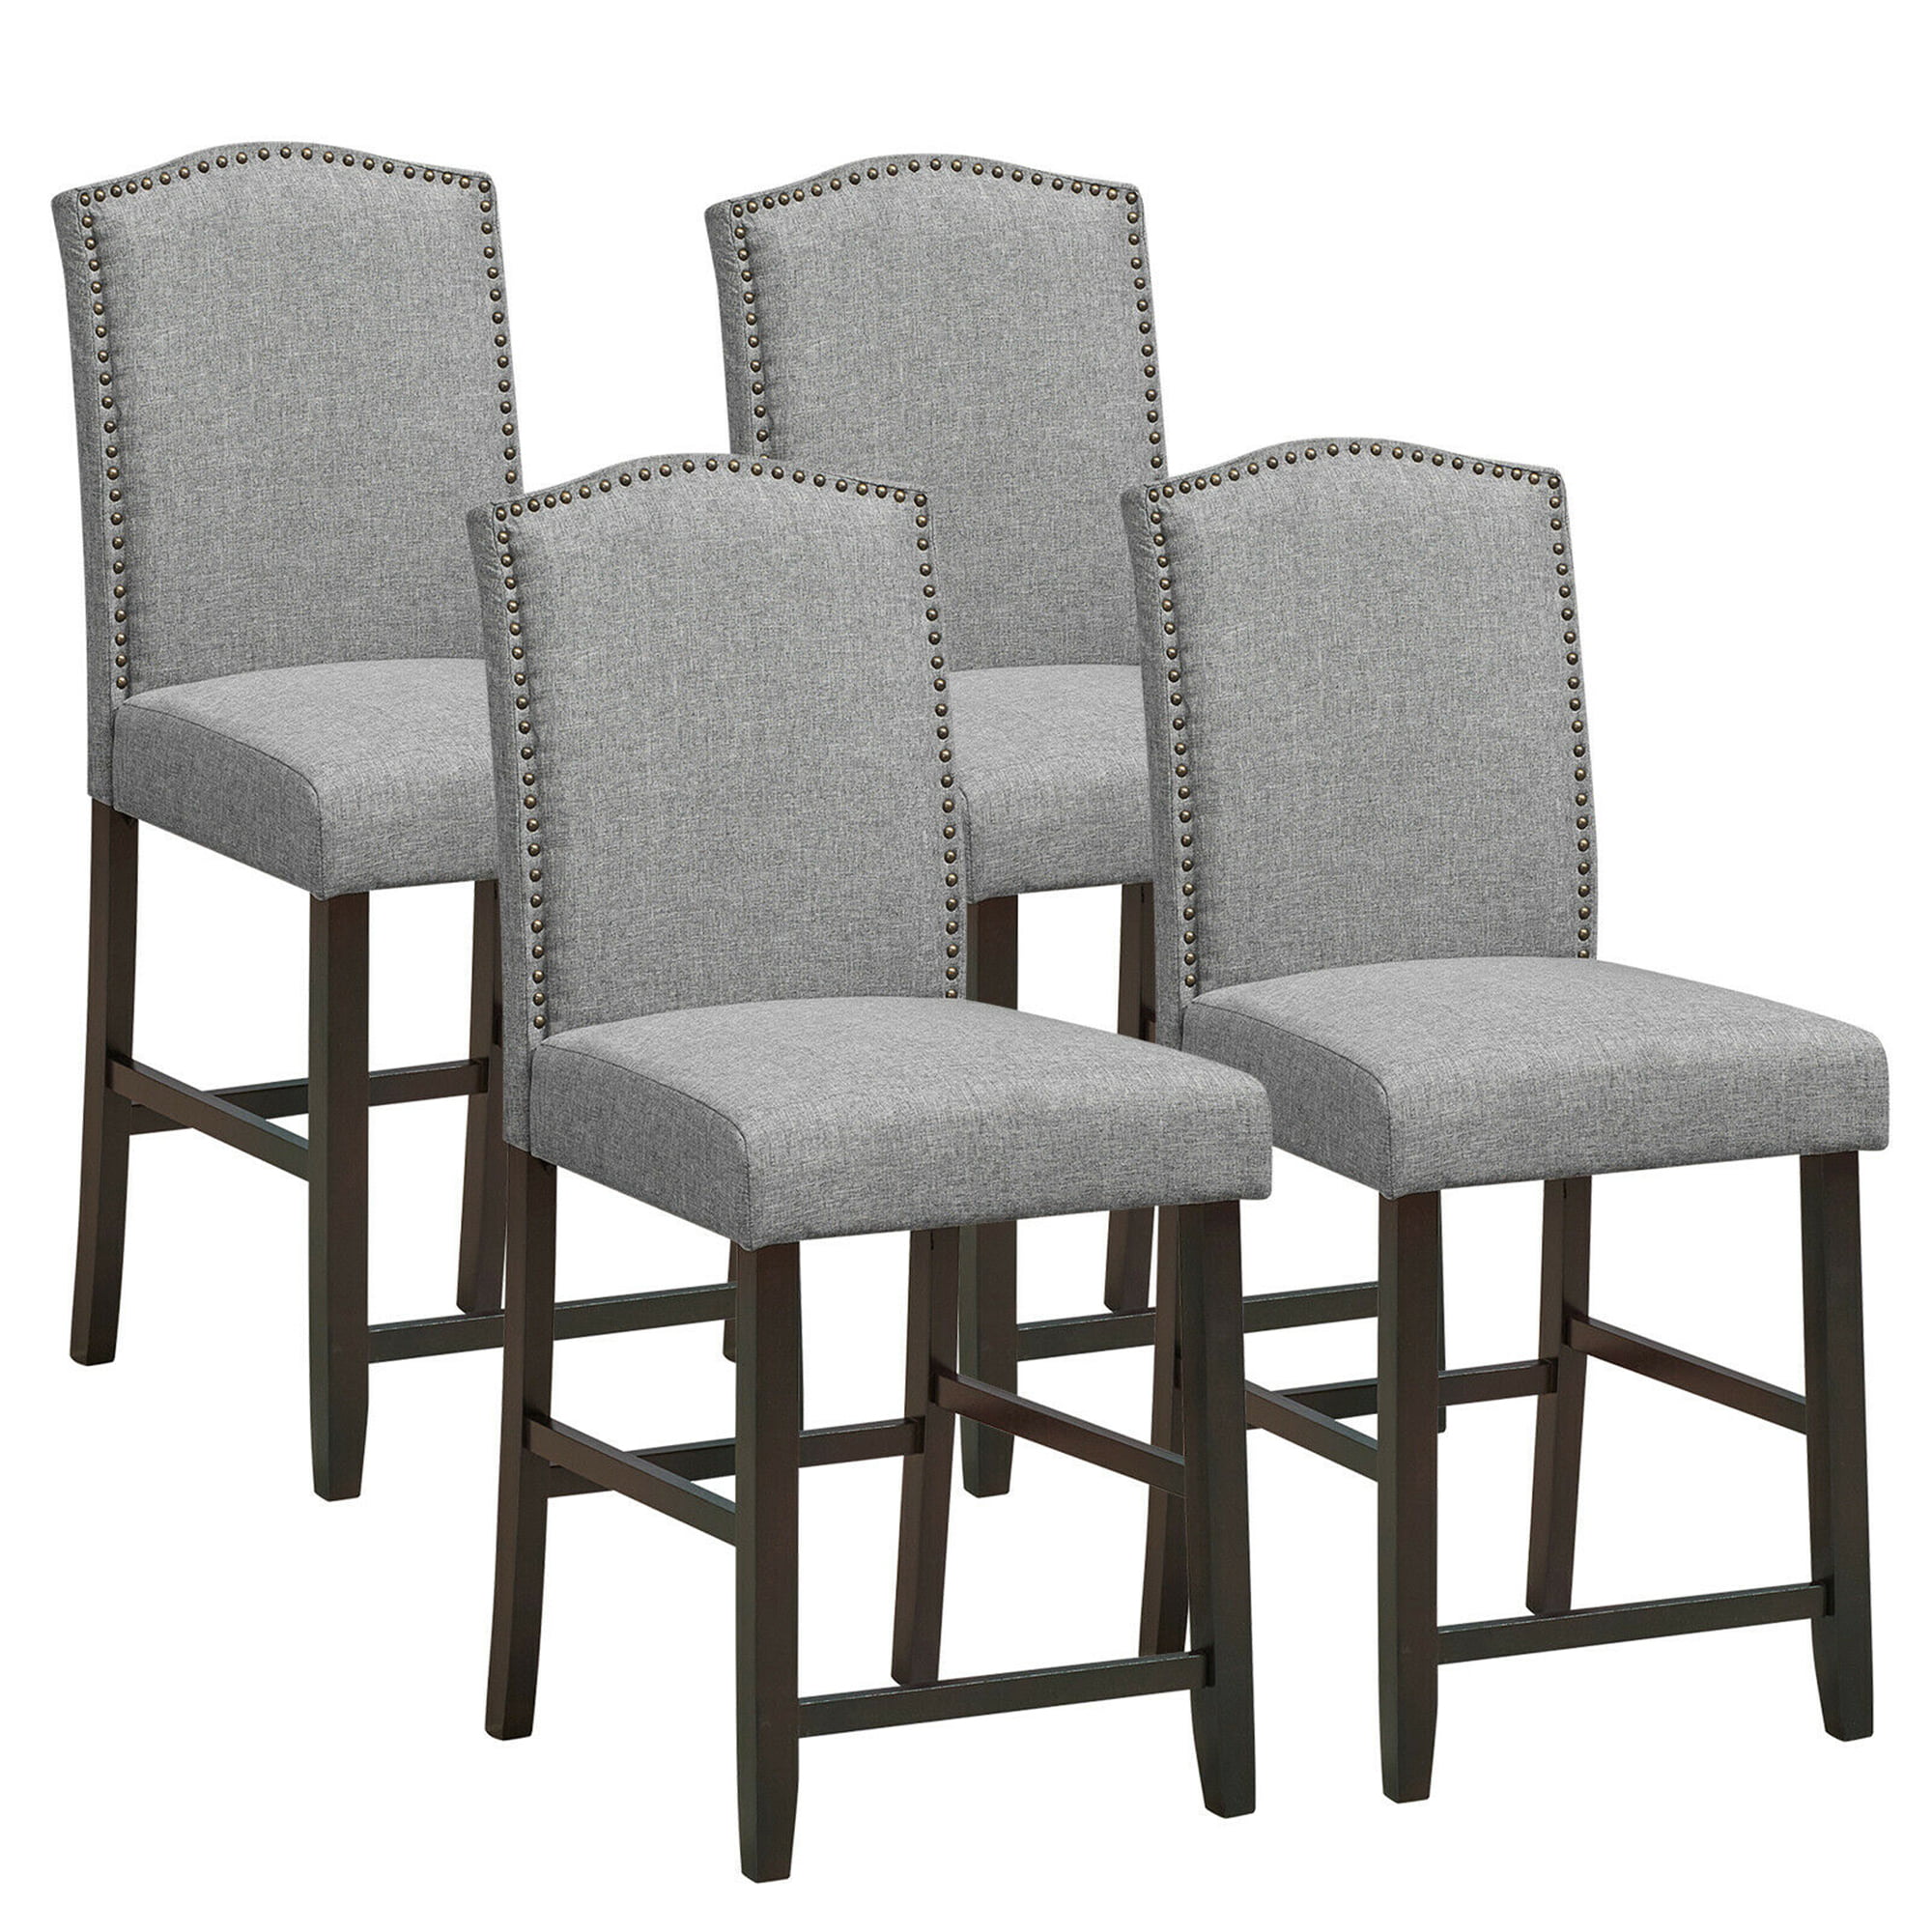  Dining Chairs Set Of 4 Grey for Small Space